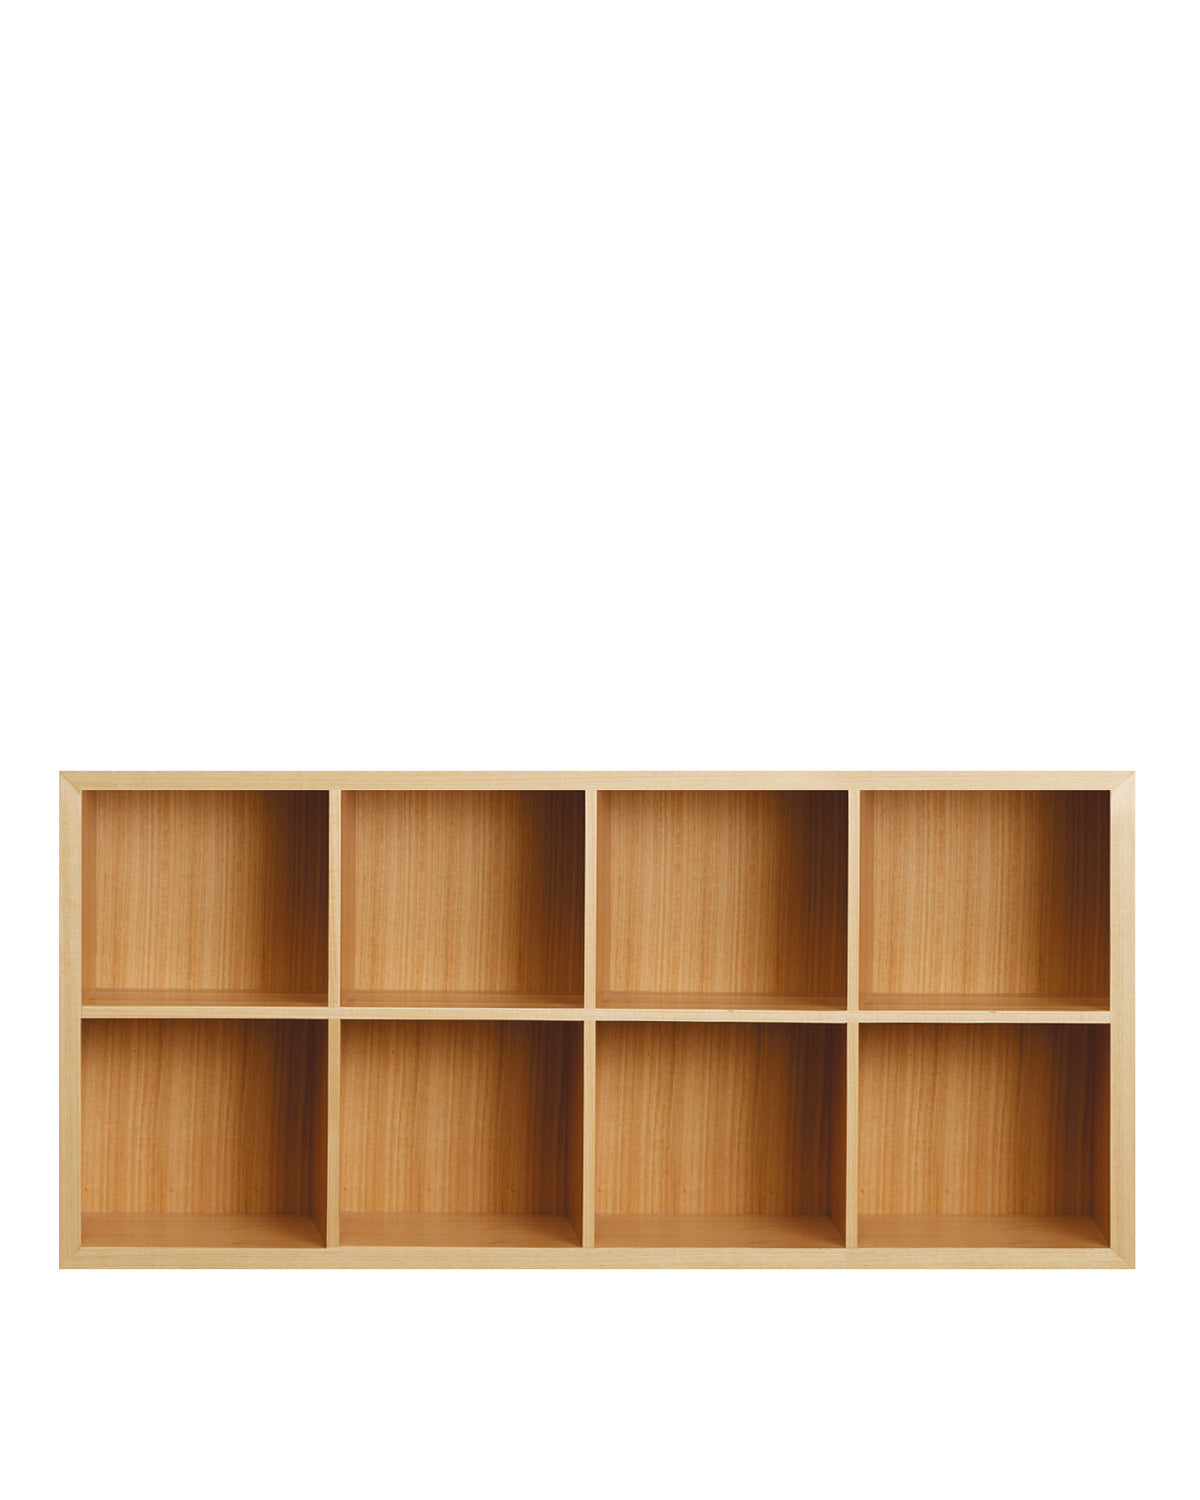 Scoop Bookcase Shell is an open bookcase with open cavities to display books and treasures. The shell frame conceals intricate mitred joinery. To add more storage options, add on interchangeable felt storage boxes.  Timber sourced from sustainably managed forests. Lead-times may vary from 6-14 weeks (contact our showroom). Timber swatches available on request.  72.2H x 30D x 147.8W cm